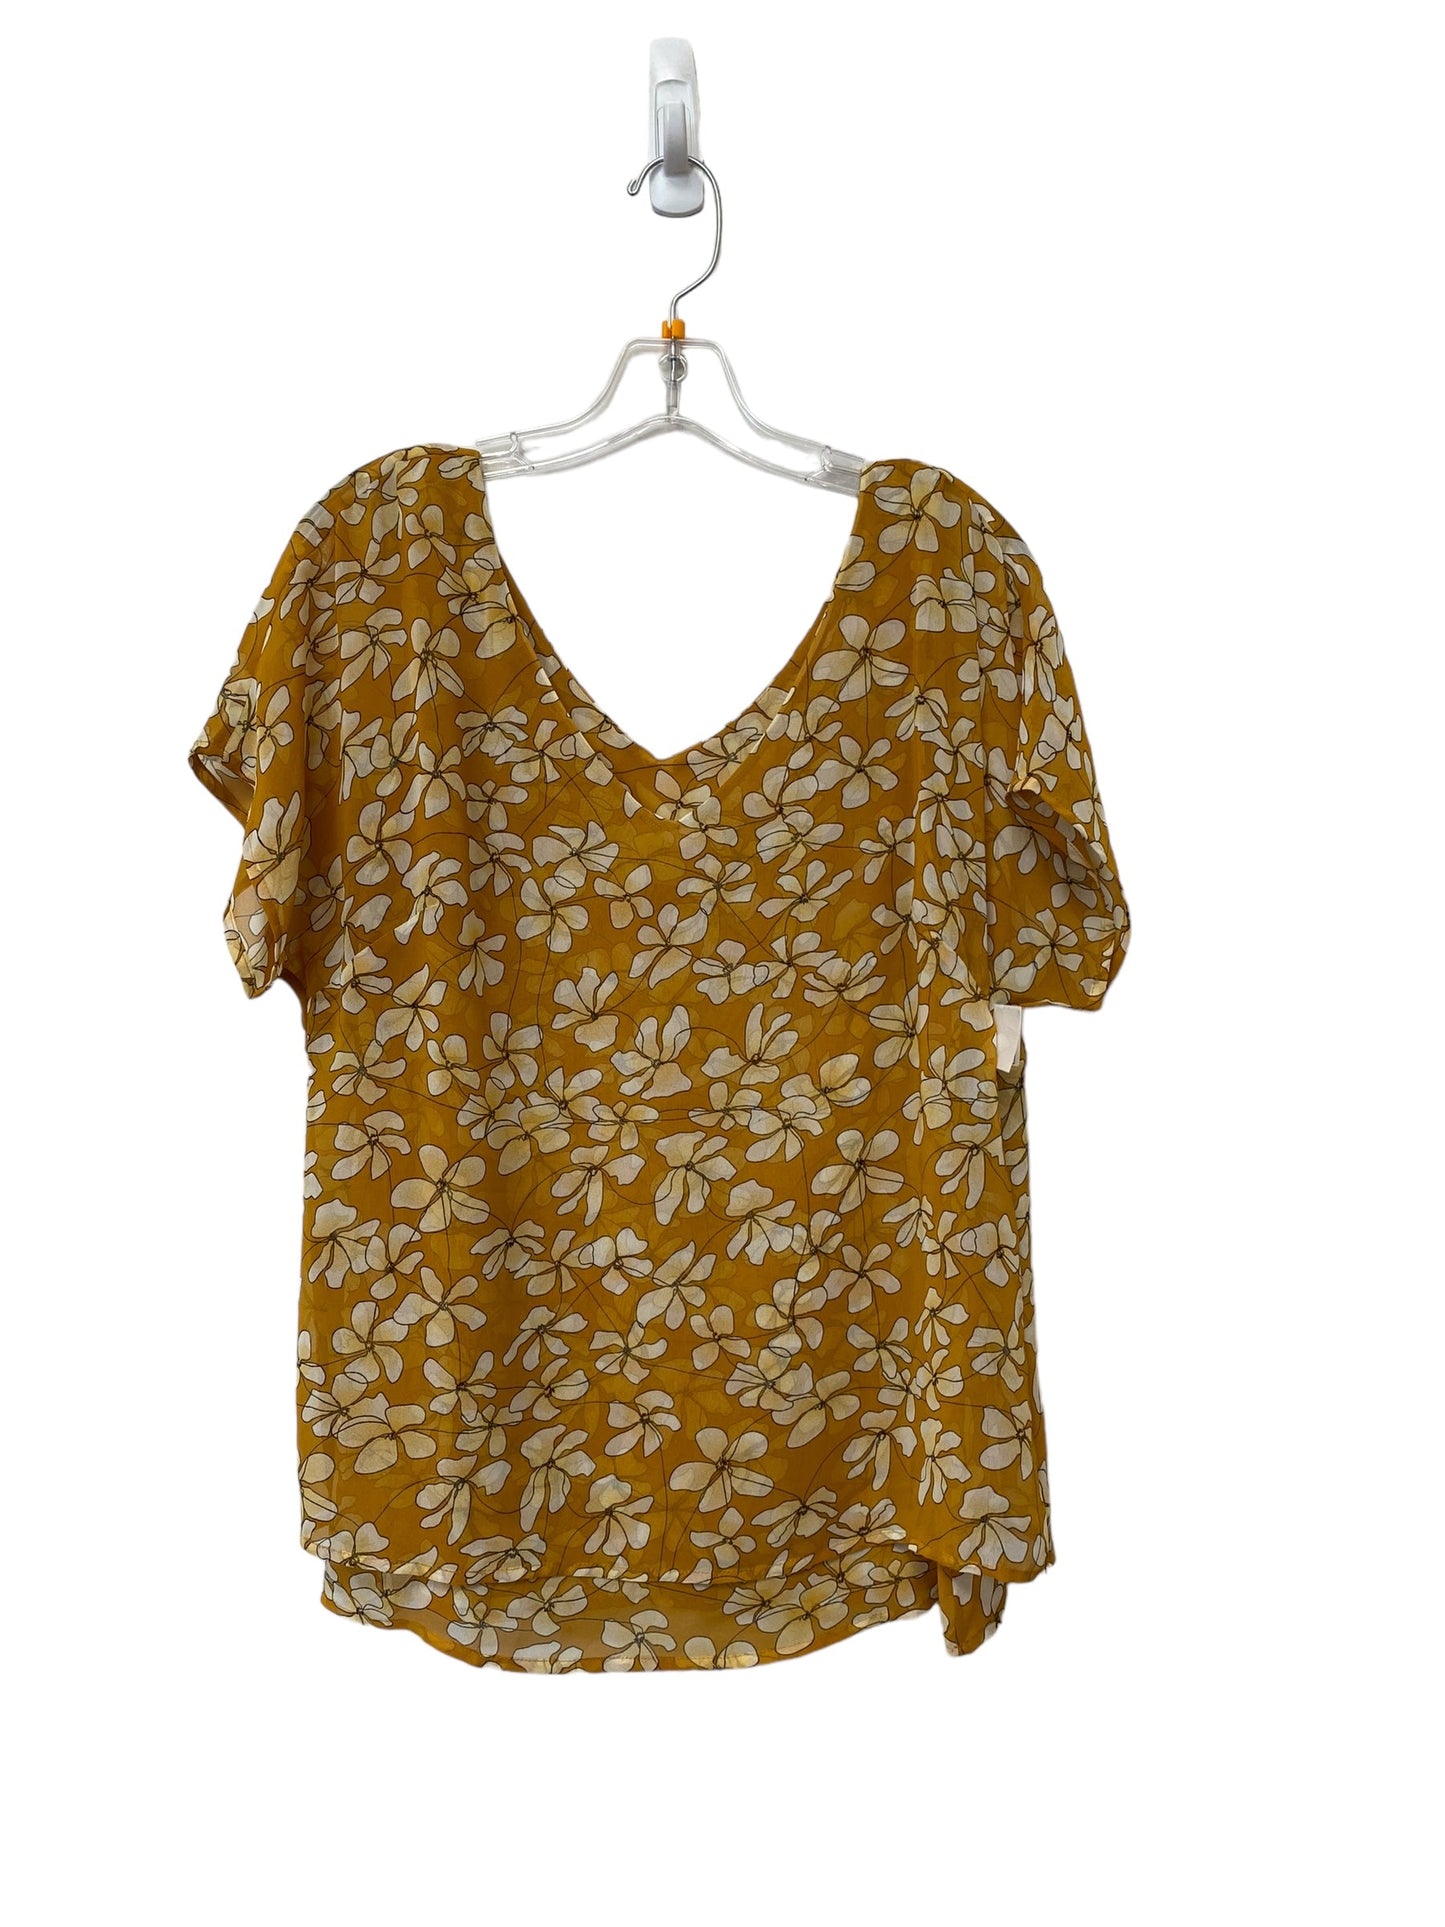 Yellow Top Short Sleeve Cabi, Size S